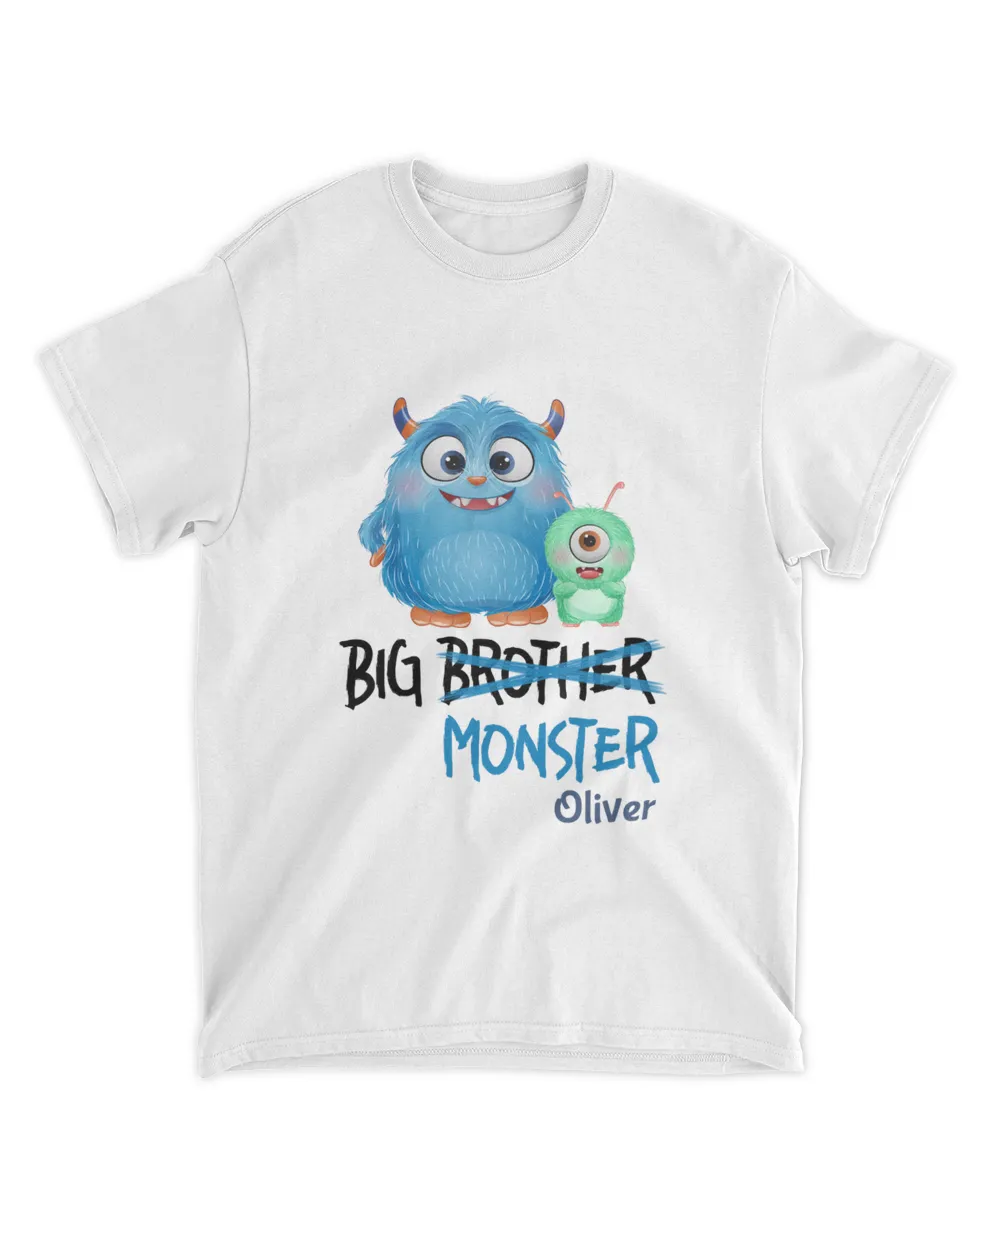 RD Big brother little brother shirt matching sibling shirts- great for big and little sisters-1